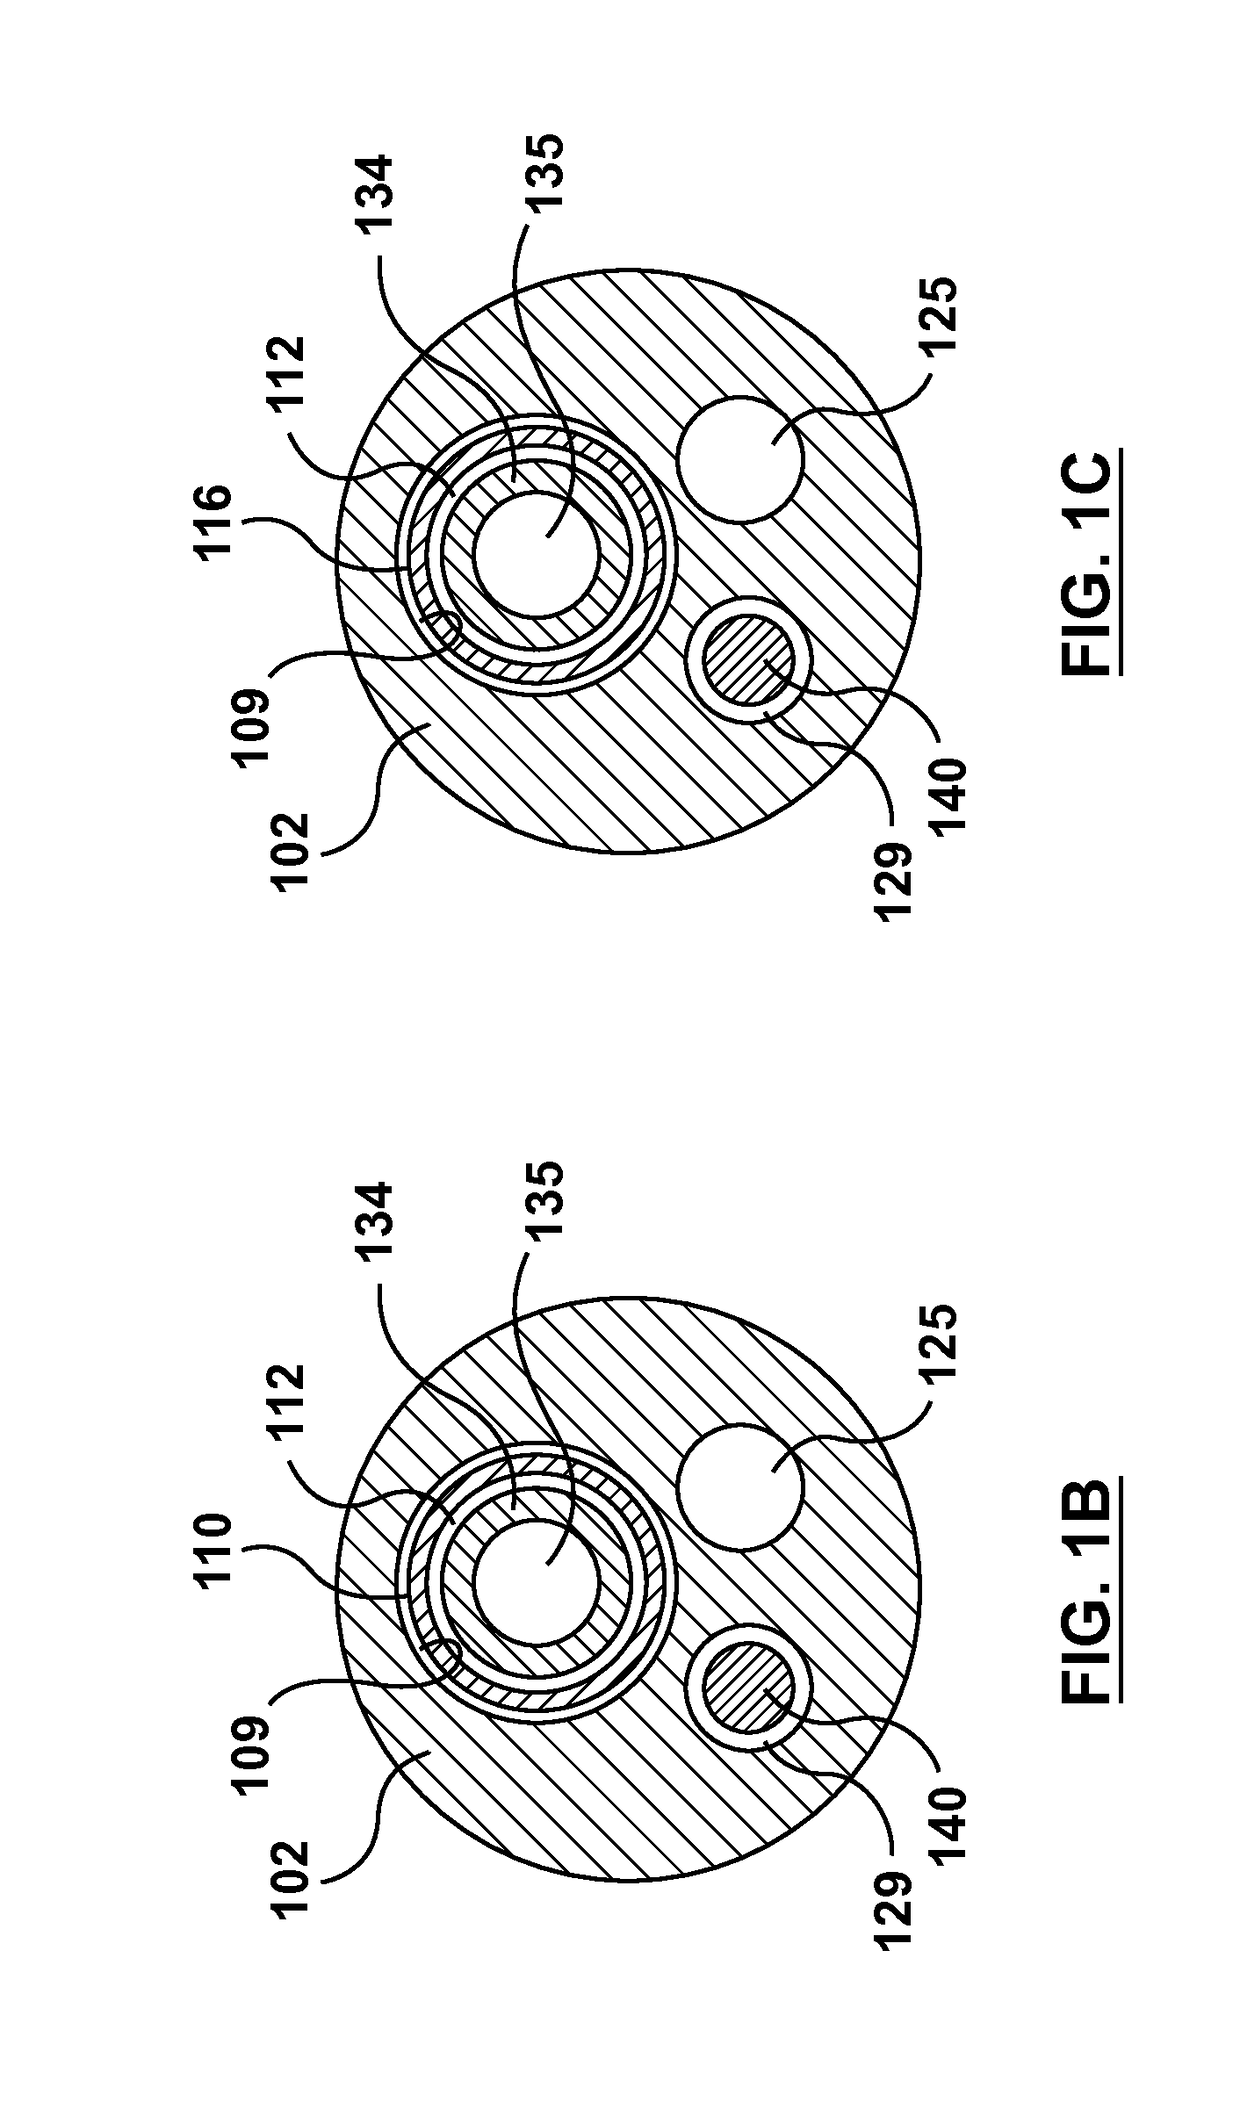 Occlusion Bypassing Apparatus With a Re-Entry Needle and a Stabilization Tube